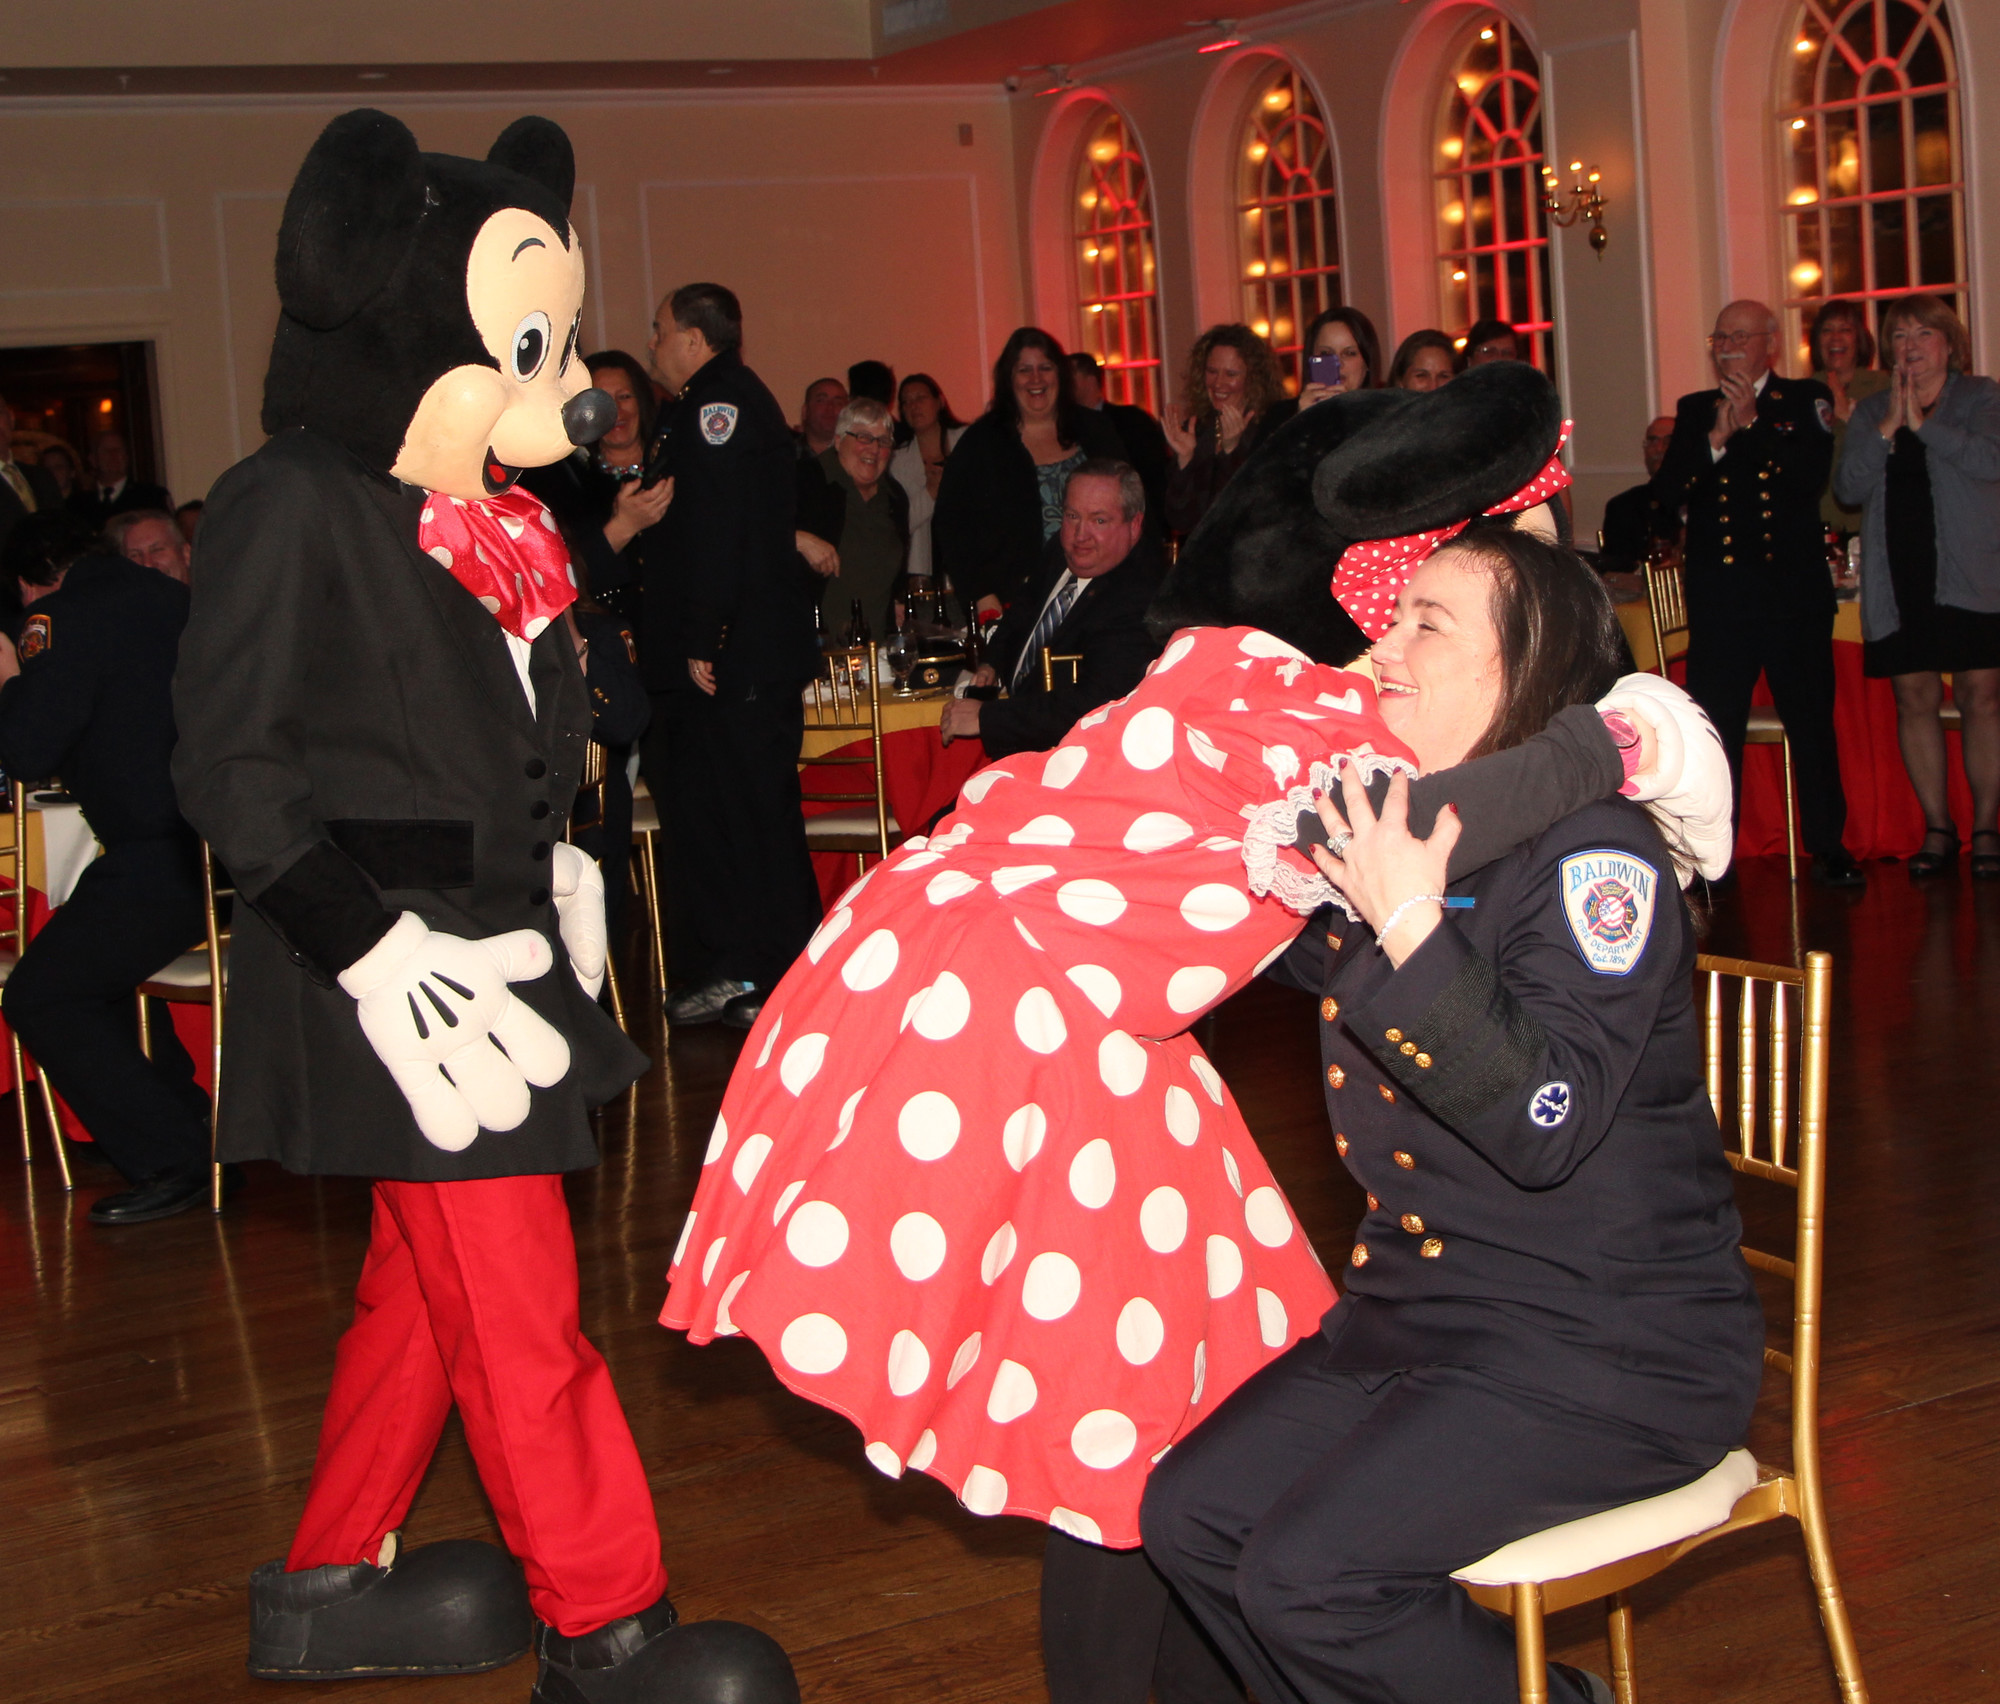 New chief Karen Bendel got a surprise visit Mickey and Minnie Mouse.